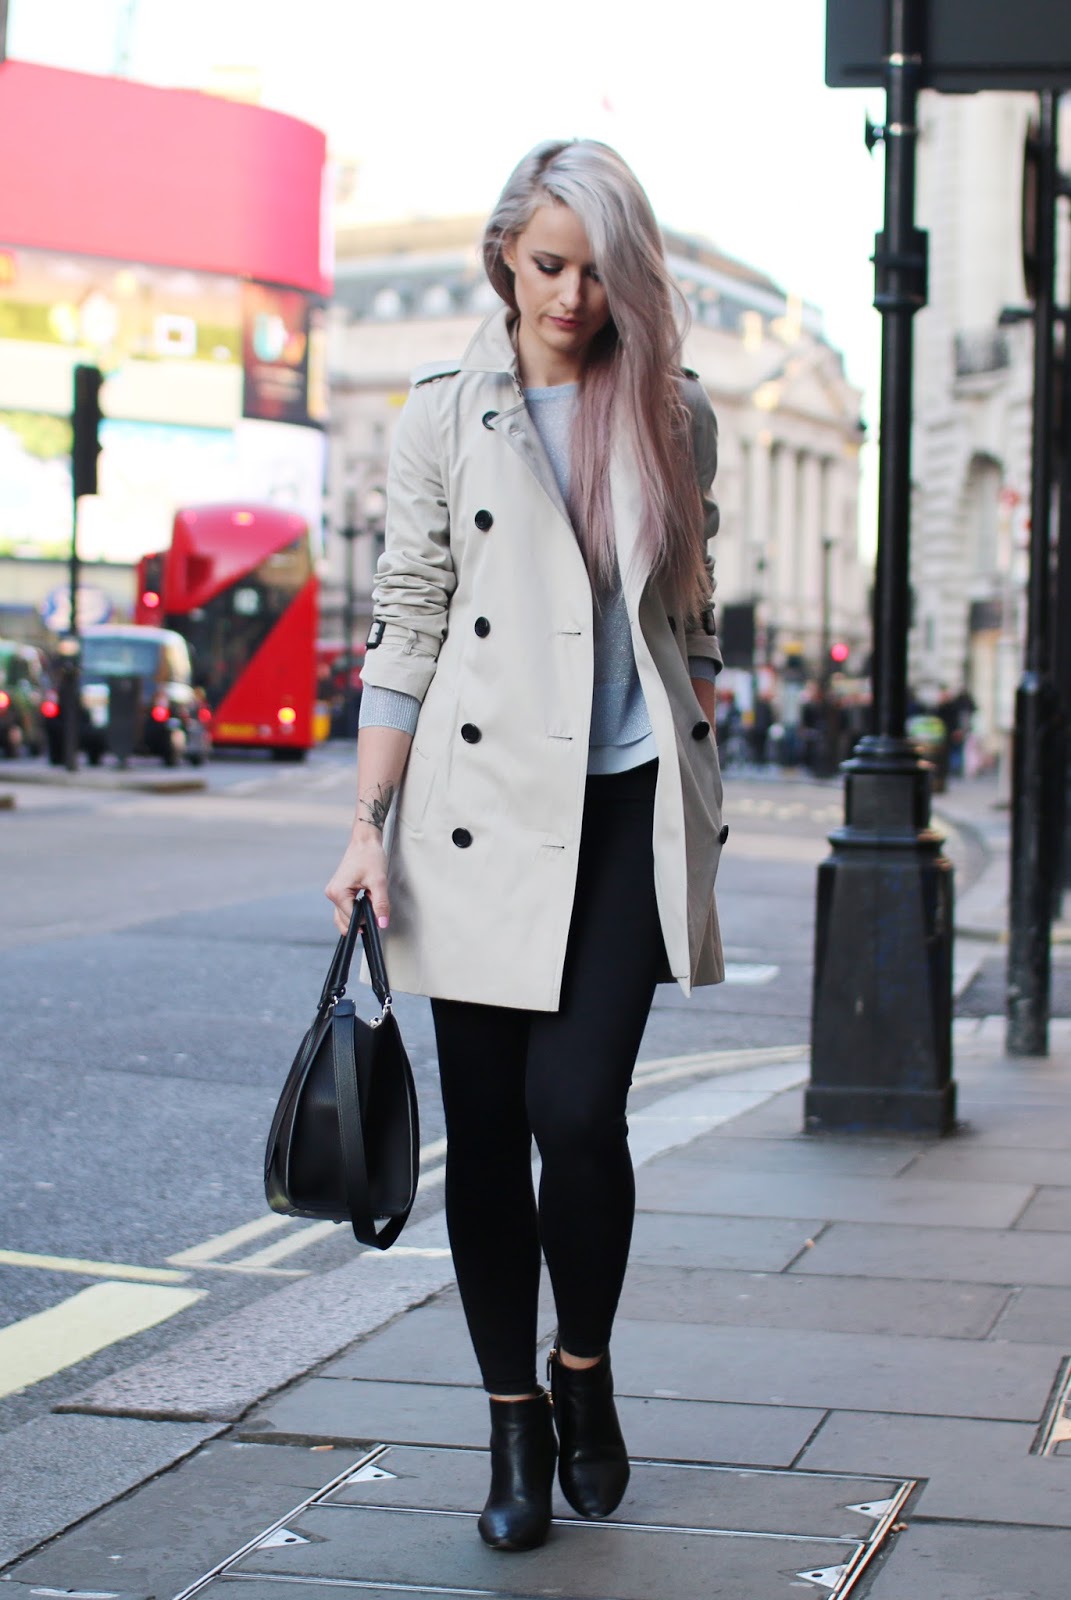 Burberry Trench / Chloe Boots / Whistles Knit / Topshop Jeans / Fendi Tote